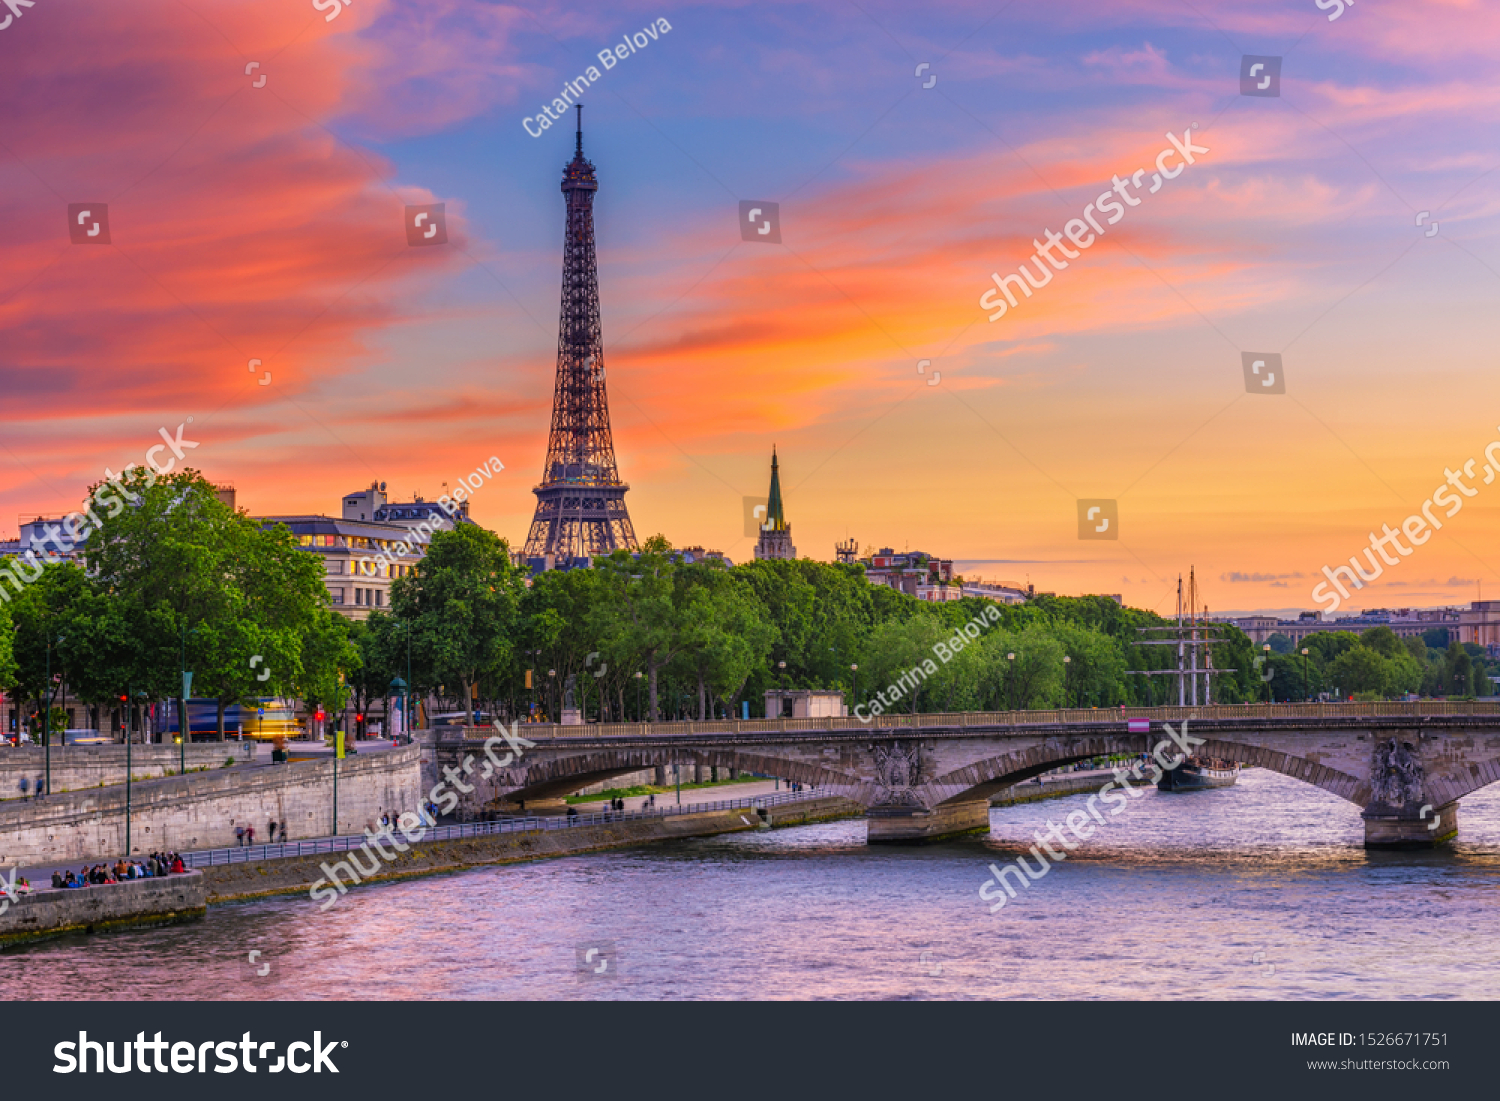 Sunset view of Eiffel tower and Seine river in Paris, France. Eiffel Tower is one of the most iconic landmarks of Paris. Cityscape of Paris #1526671751